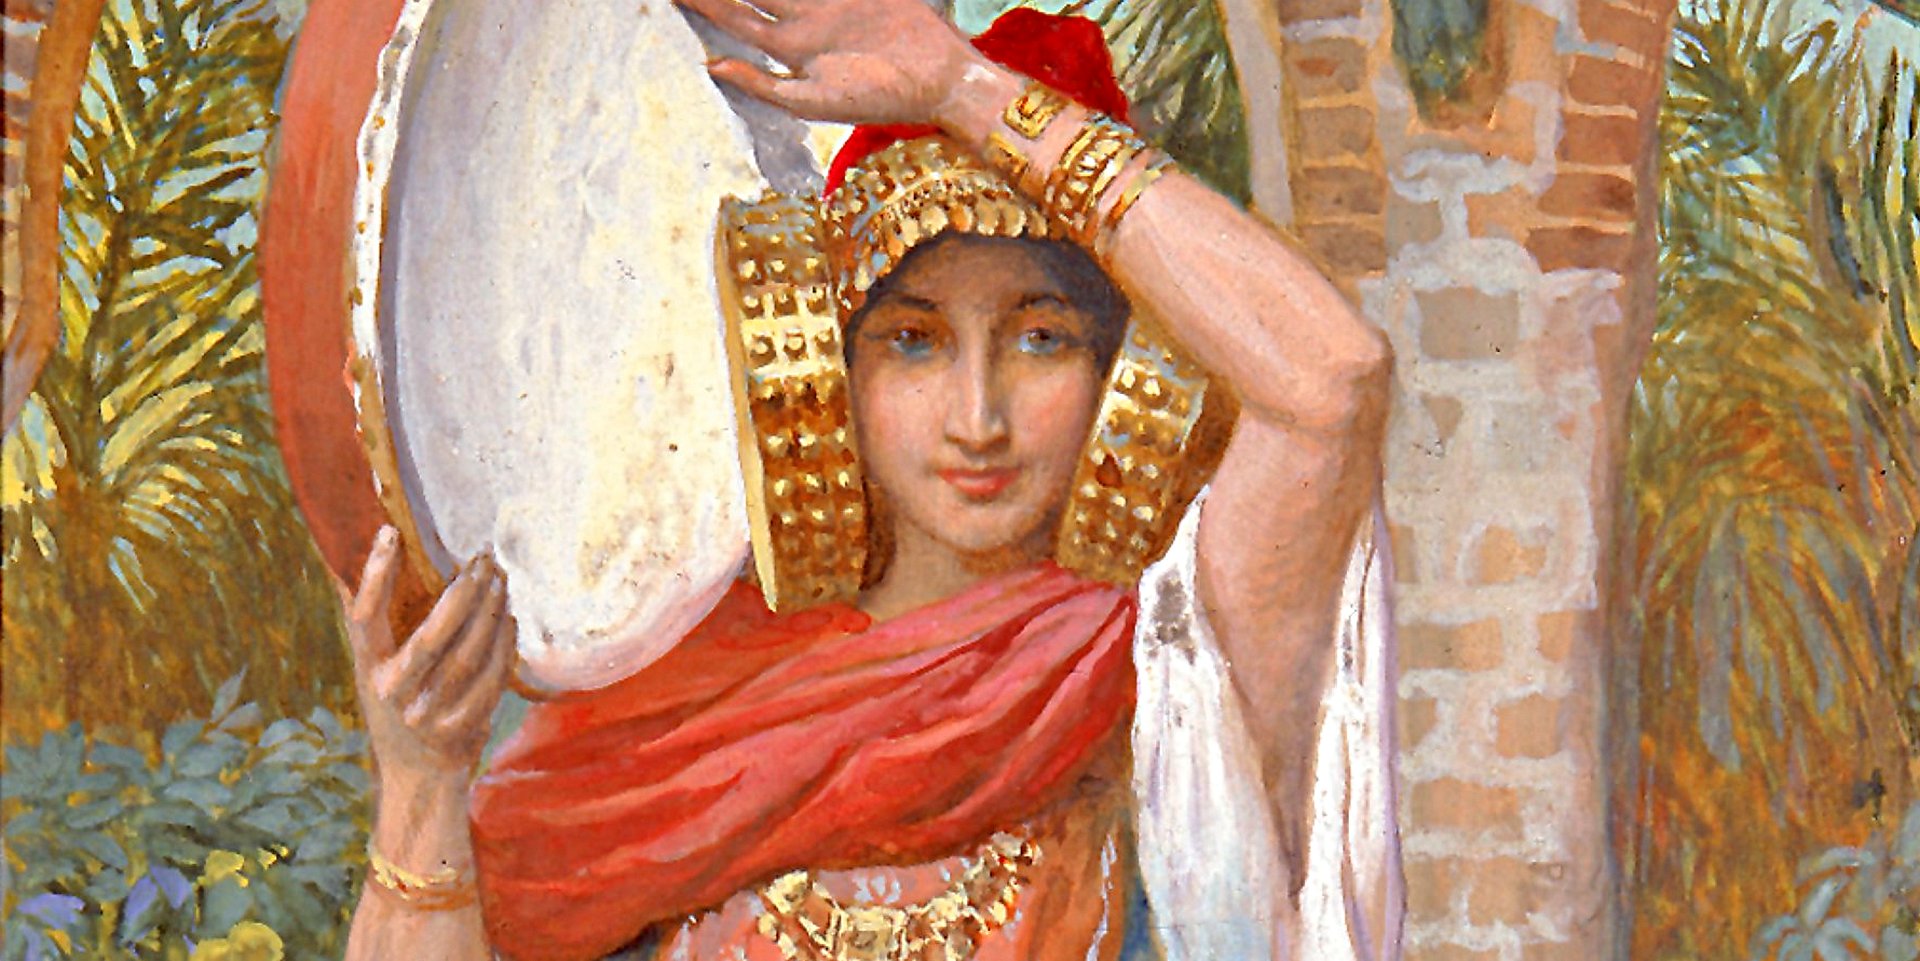 Artist’s conception of the daughter of Jephthah. Artist: James Tissot. PD